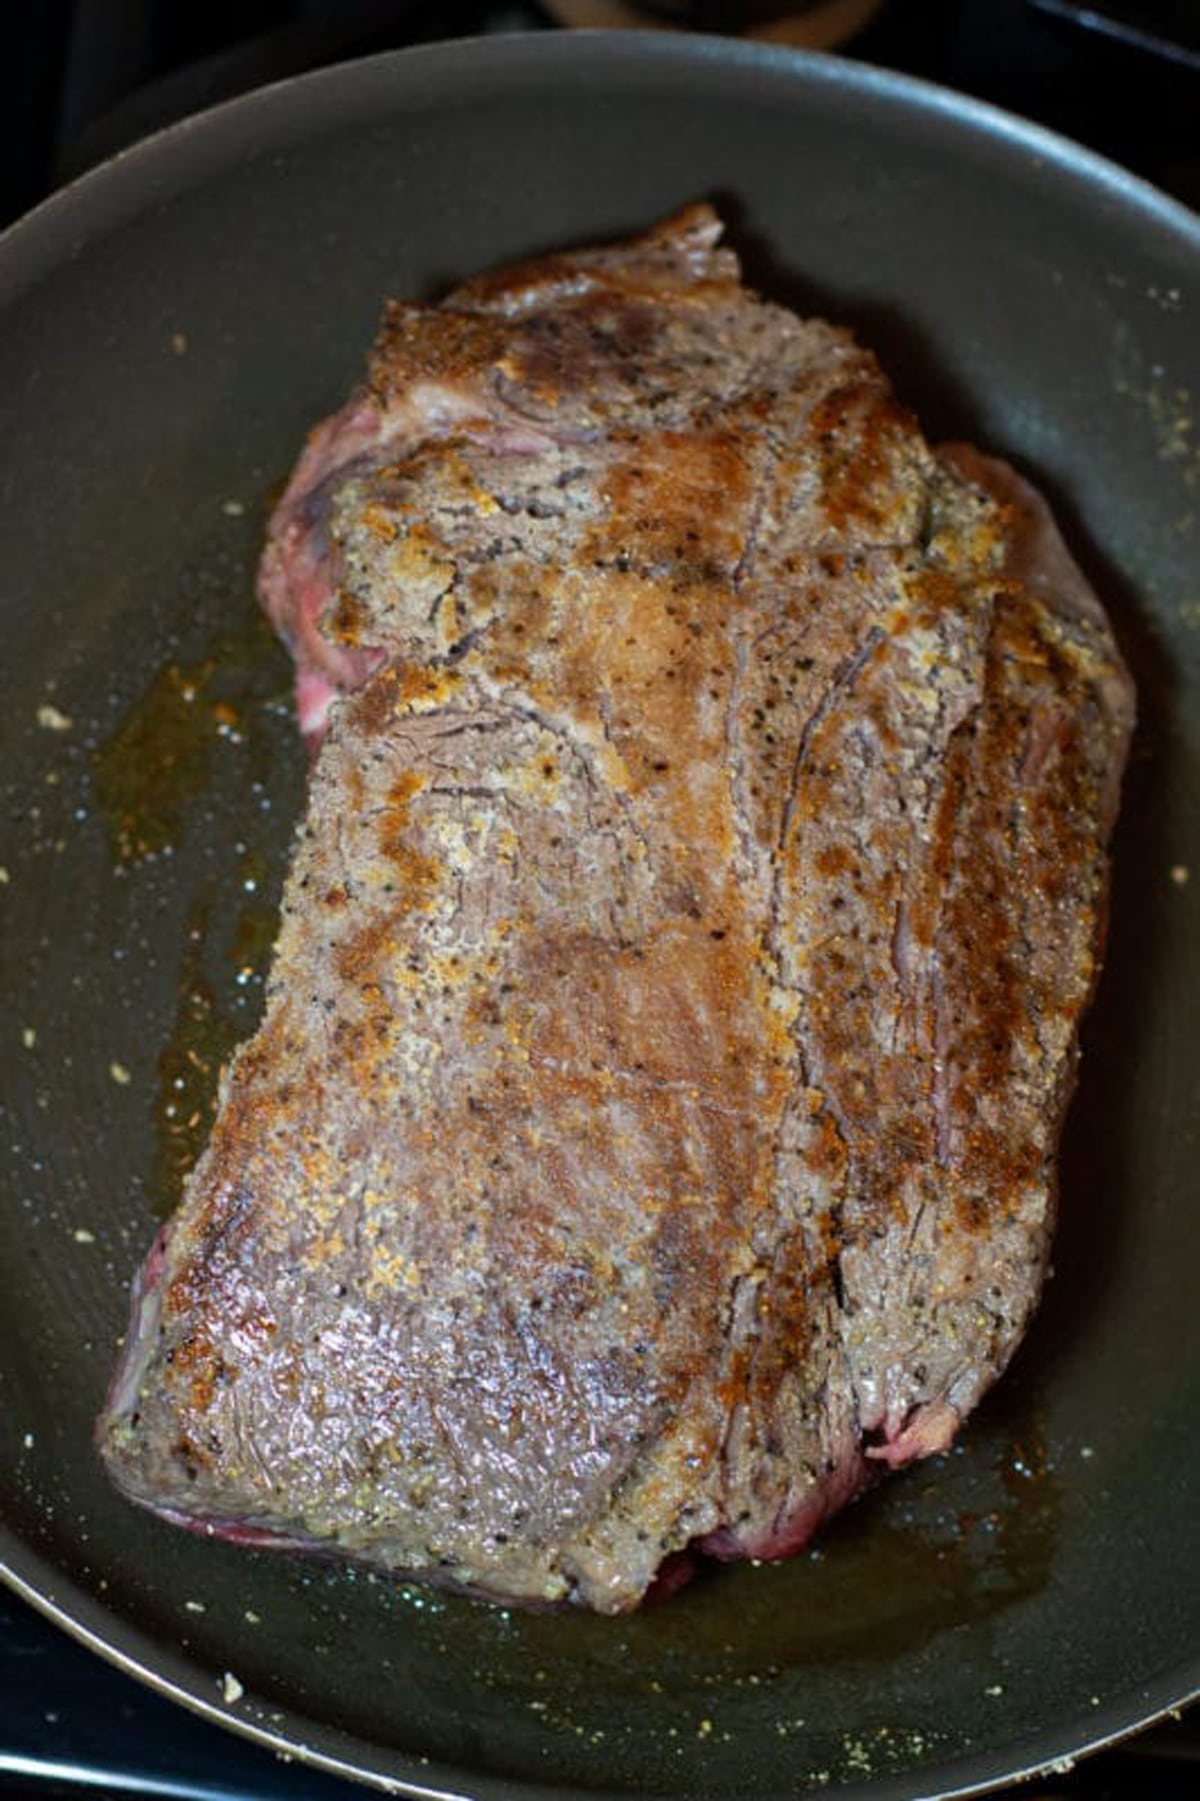 Searing a chuck roast in a skillet on stove top.